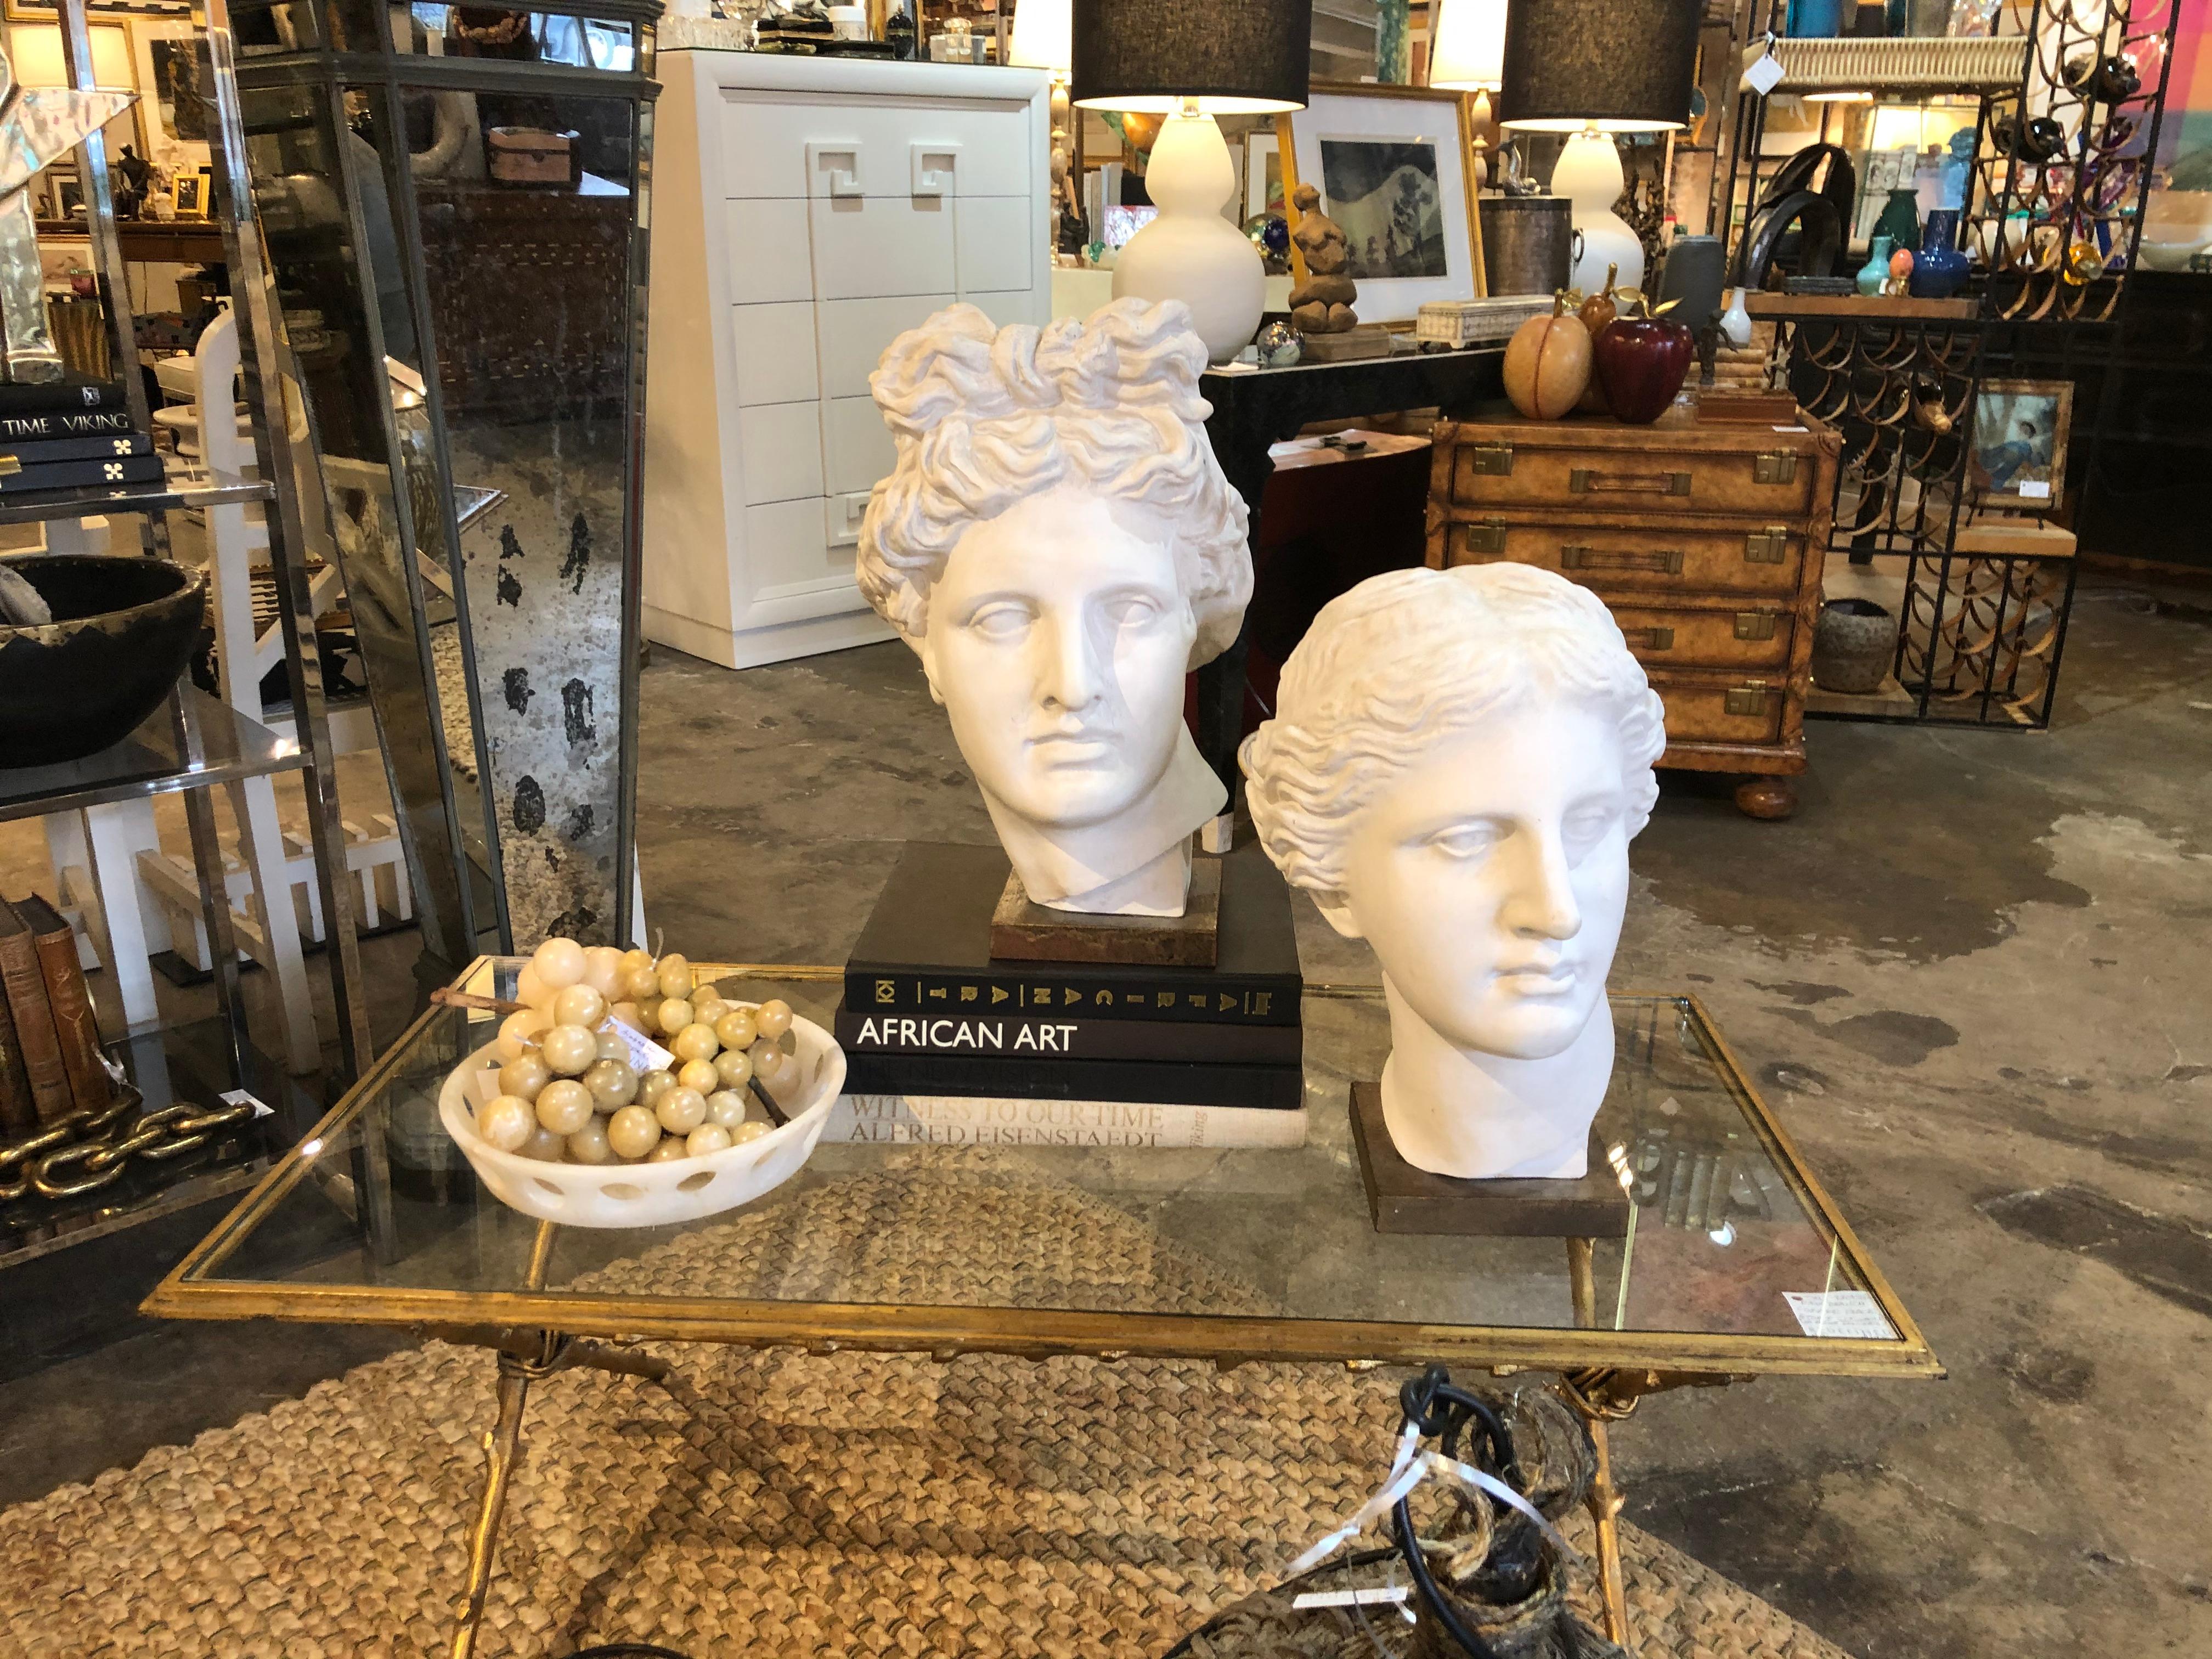 (Two) Artemis Diana and Apollo Greek God plaster busts mounted on wood plinths.